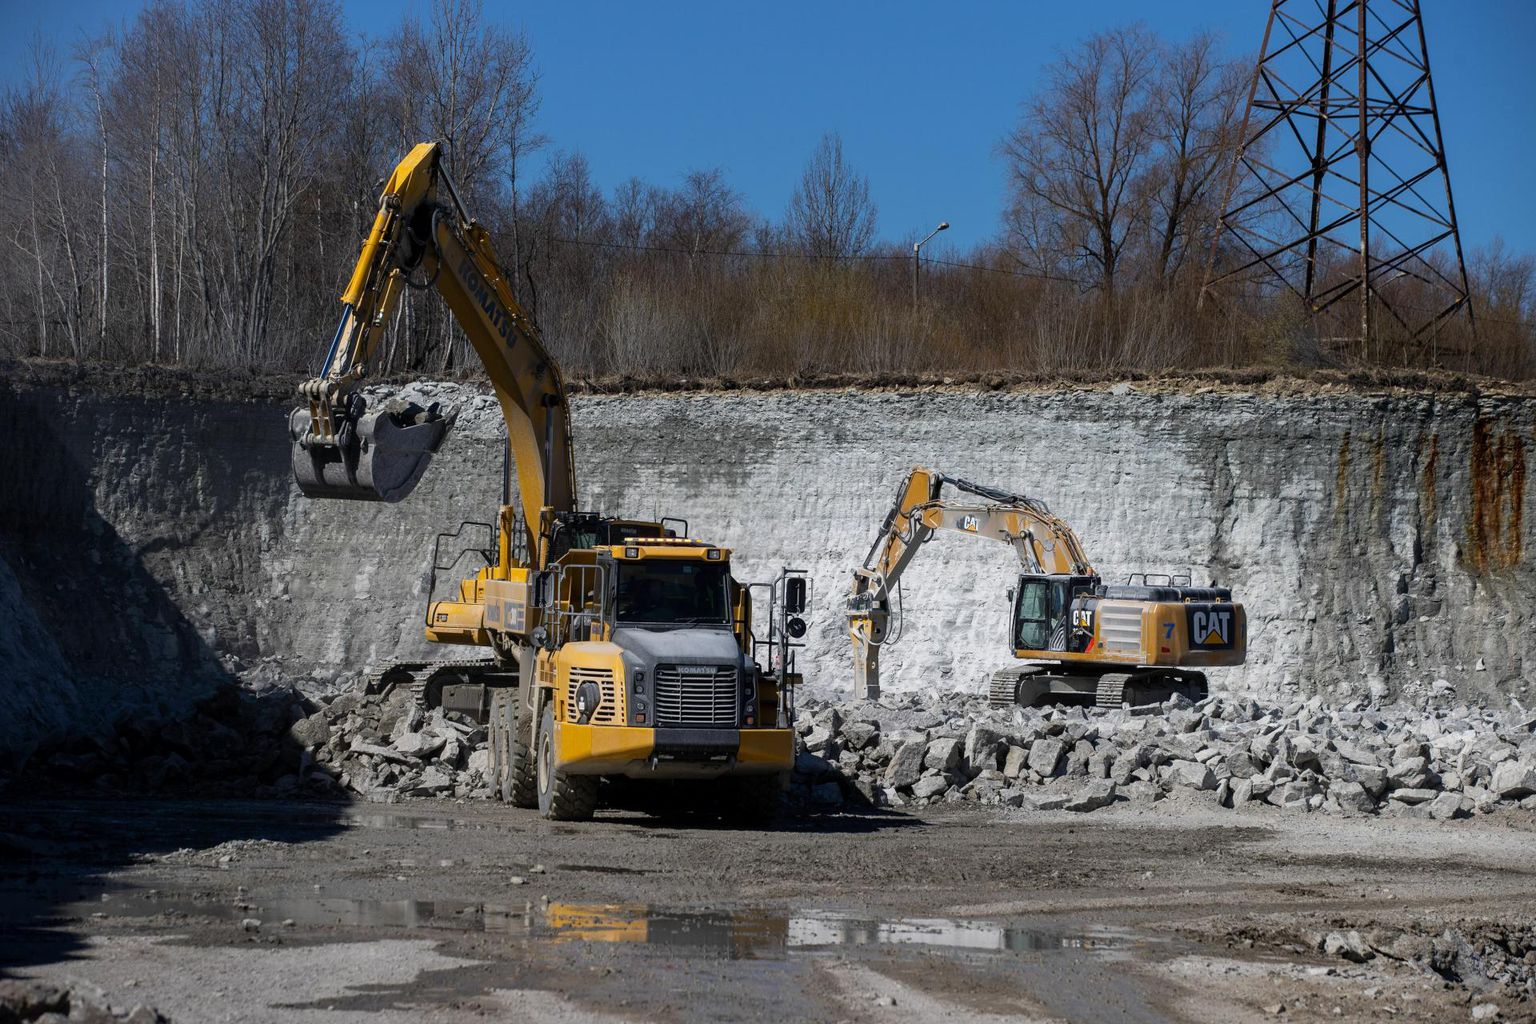 There will be a shortage of crushed stone near the capital, but no one wants a new quarry in their backyard